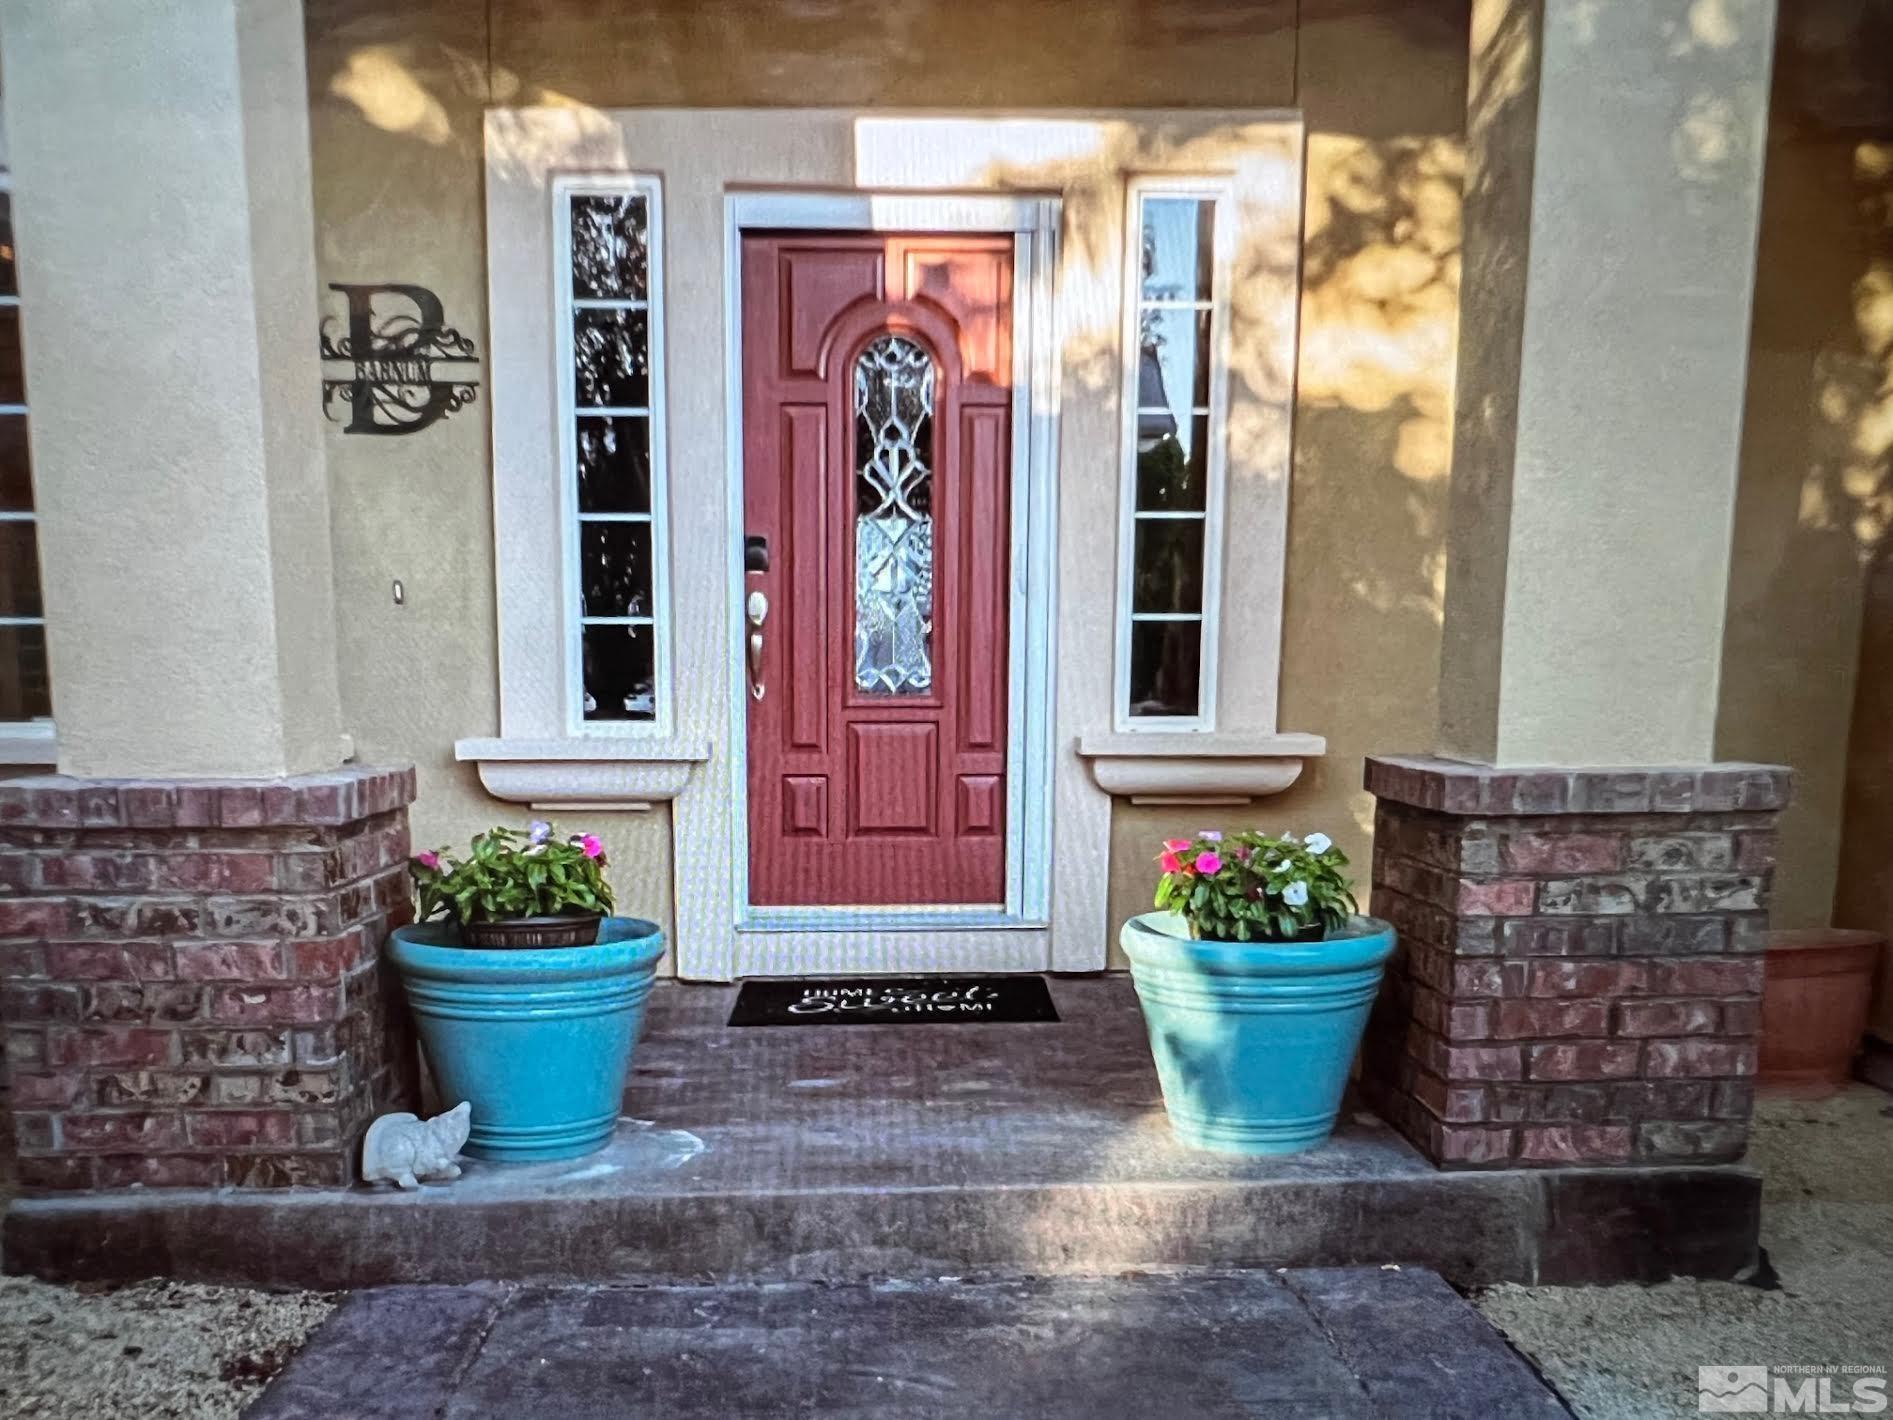 a view of a potted plant in front of a door